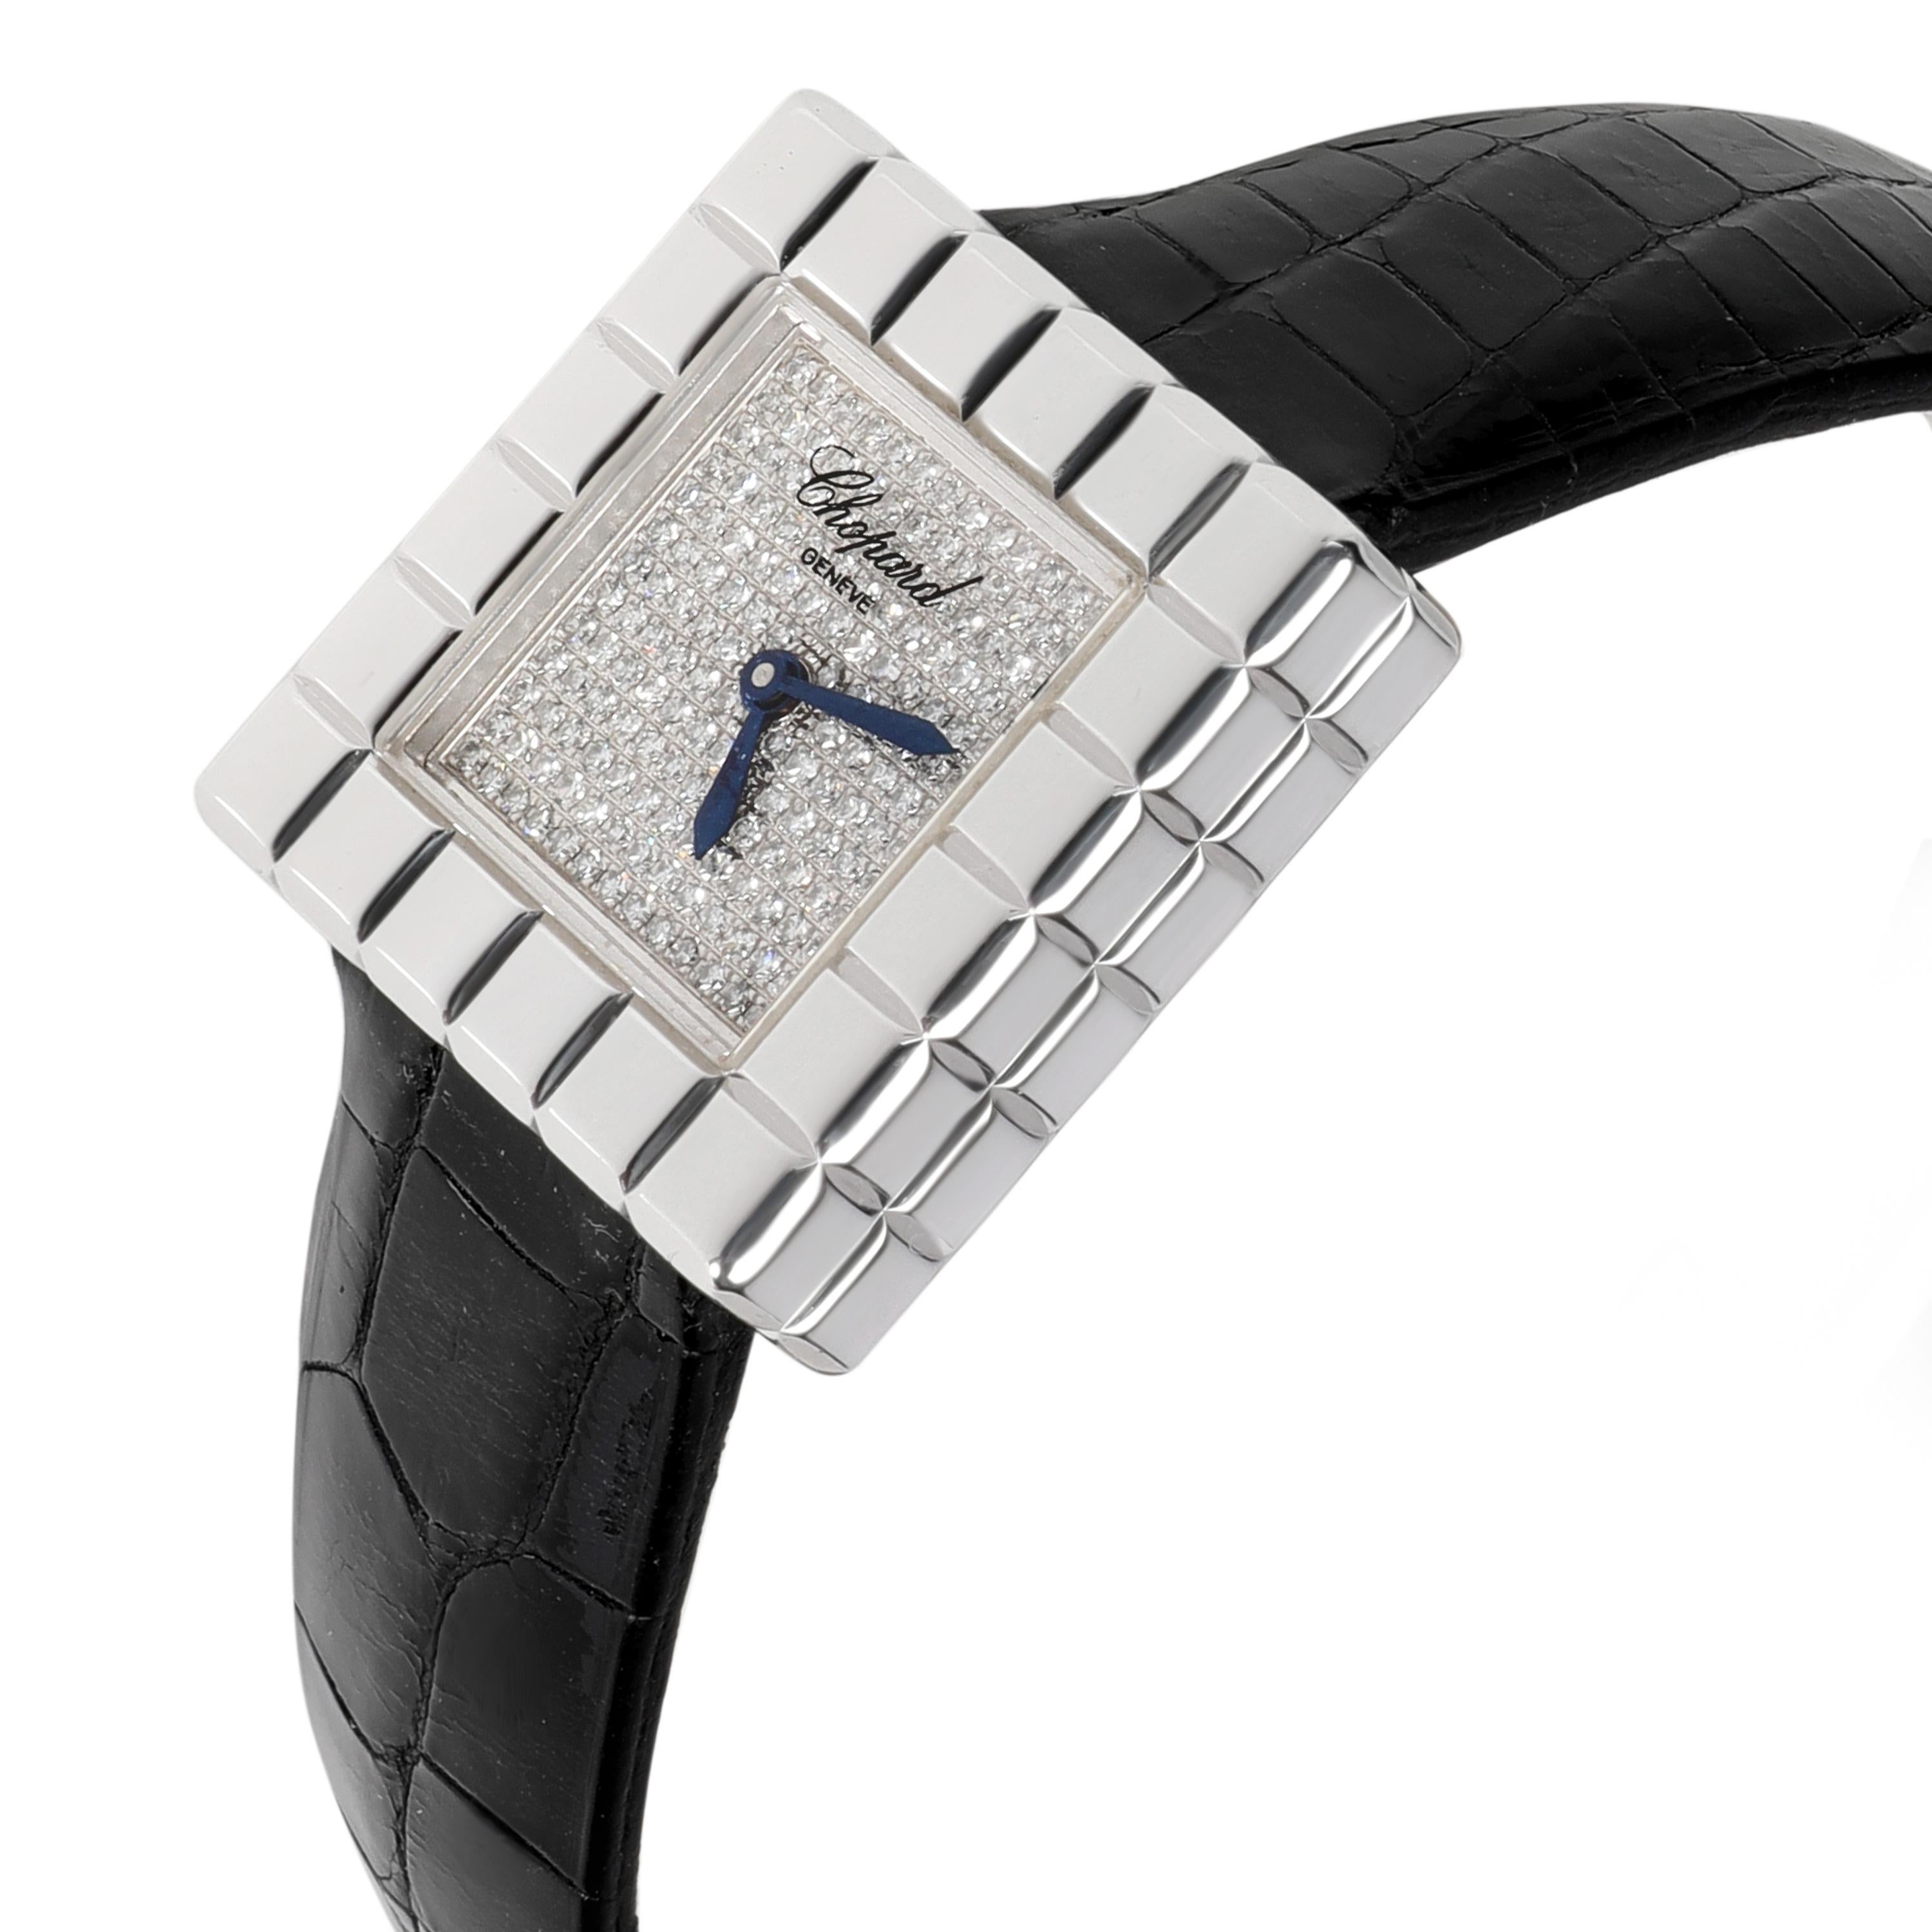 
Chopard Ice Cube 127407/1003 Women's Watch in 18kt White Gold

SKU: 106655

PRIMARY DETAILS
Brand:  Chopard
Model: Ice Cube
Country of Origin: Switzerland
Movement Type: Quartz: Battery
Year Manufactured: 
Year of Manufacture: 2010-2019
Condition: